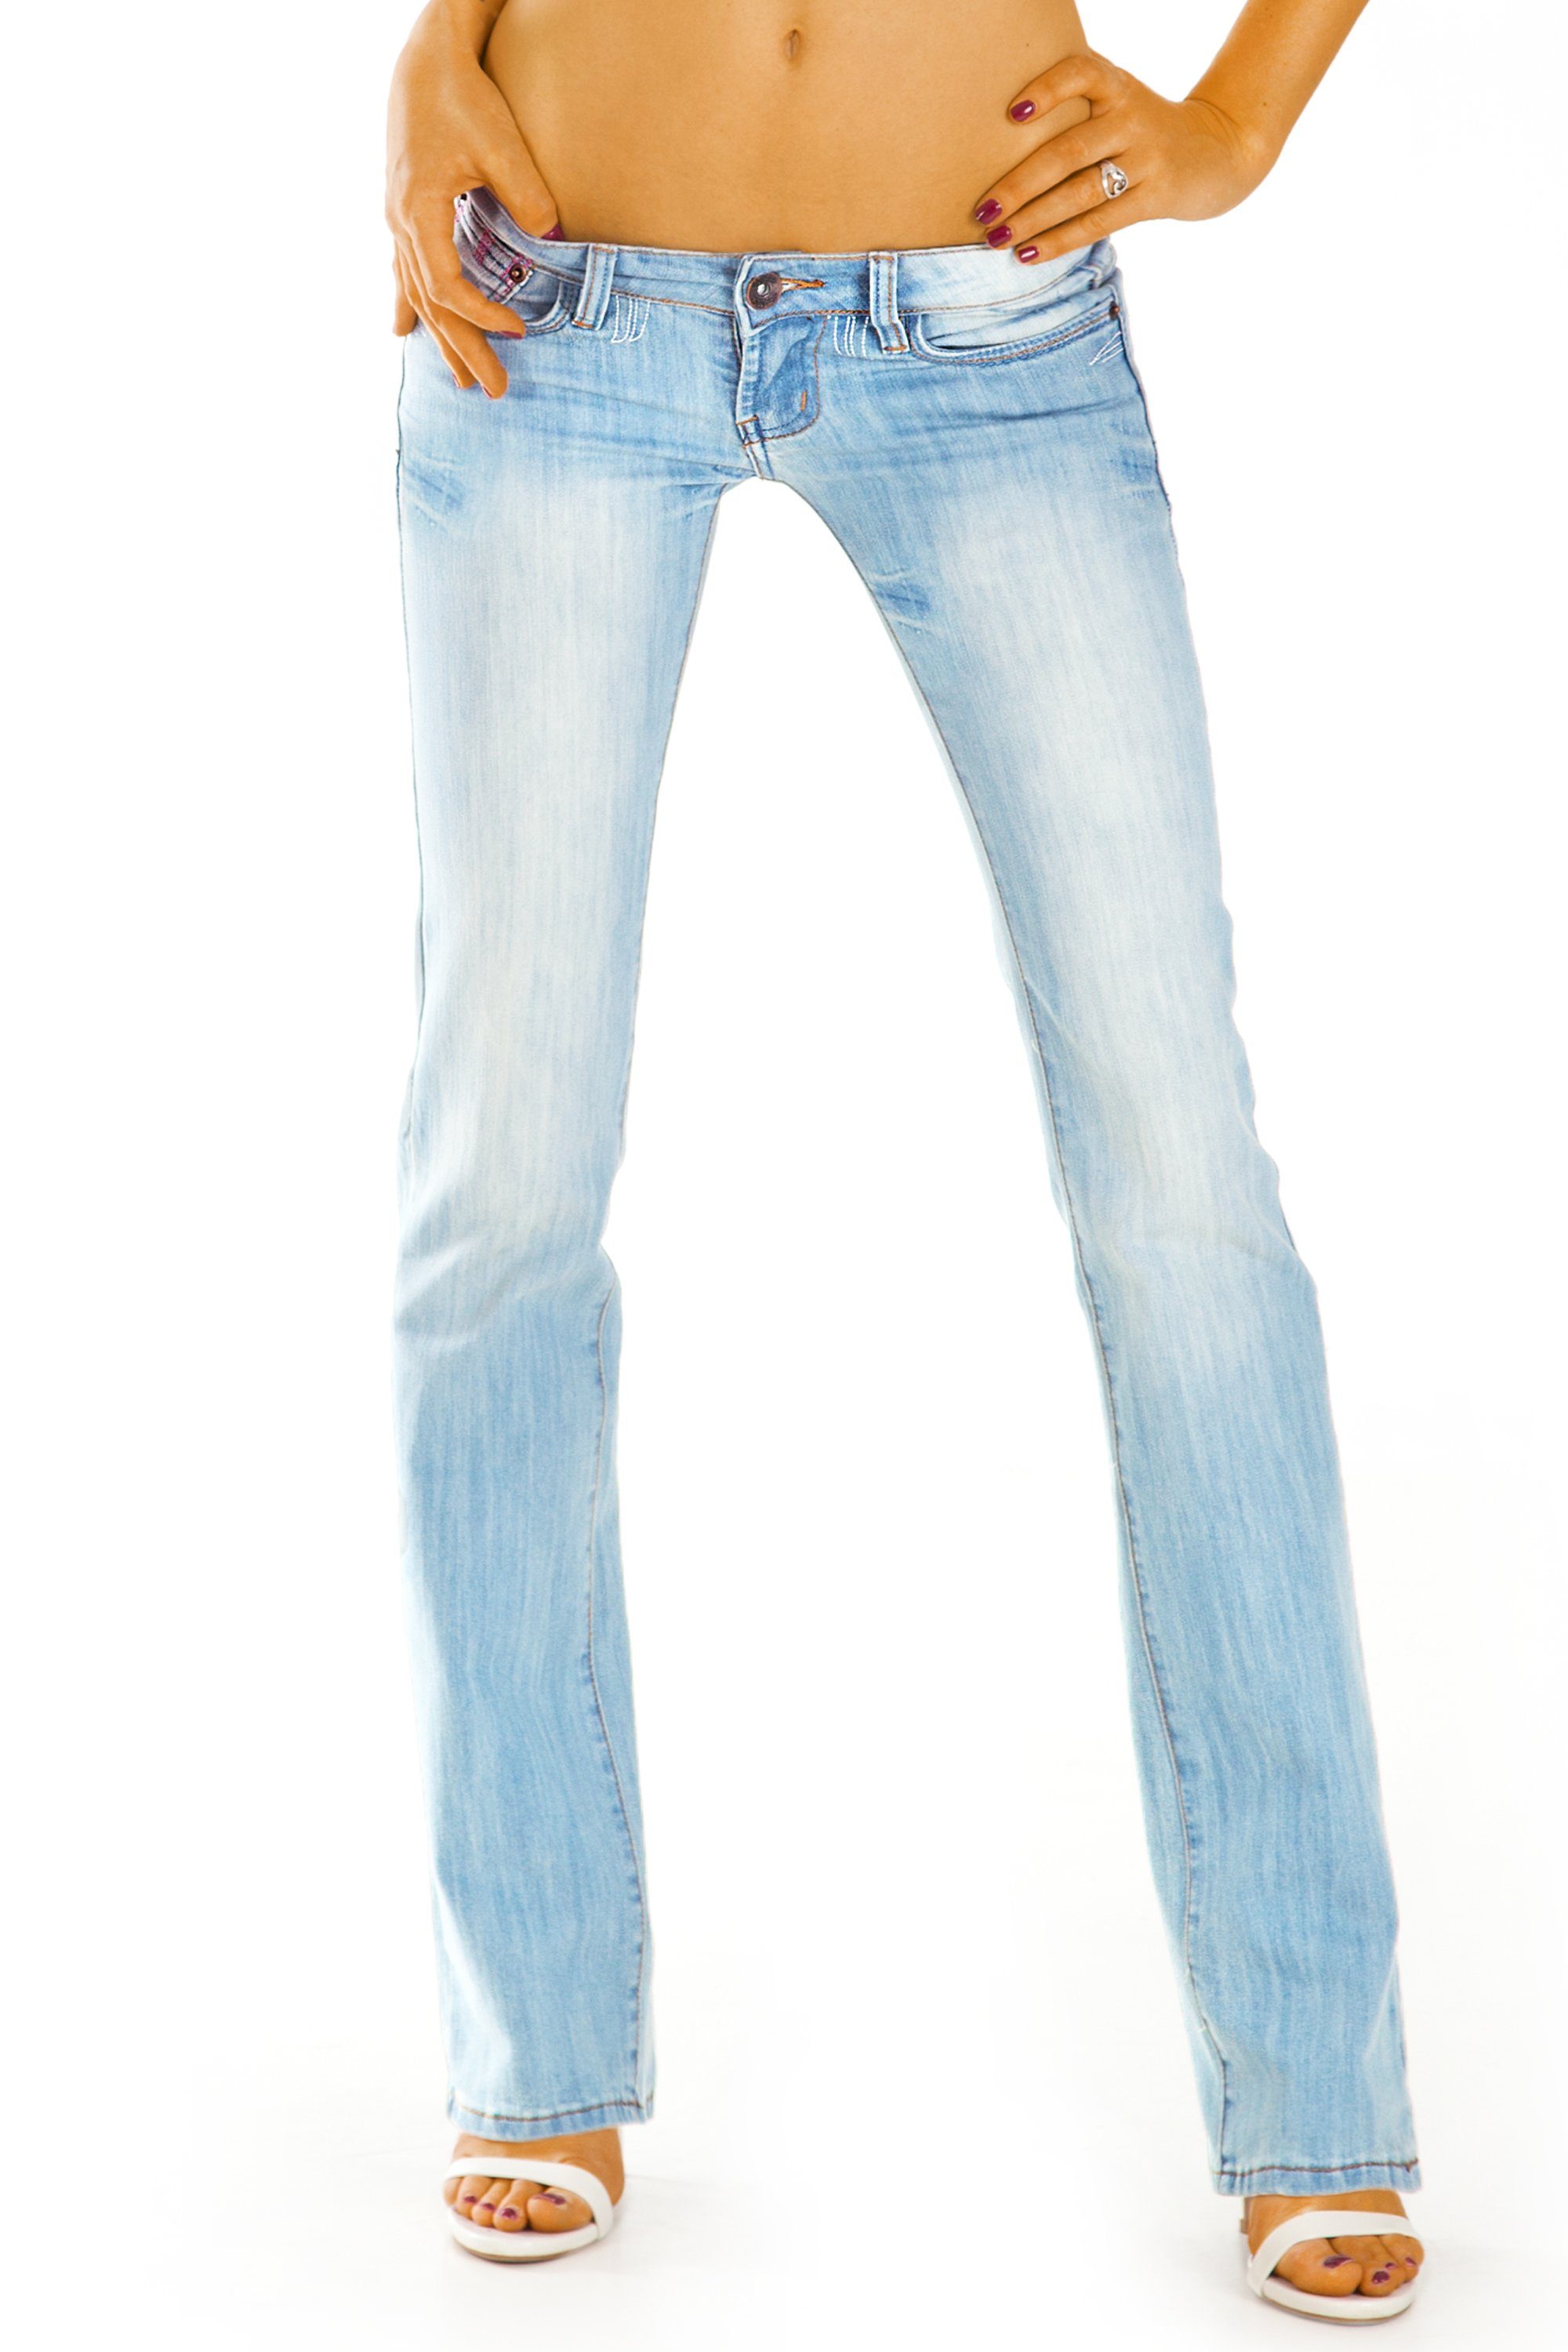 be styled Bootcut-Jeans »BE STYLED Damen Hüftjeans mit extrem tiefer  Leibhöhe - Bootcut Stretch Jeanshose Hellblau - j37a-1« sehr niedrige  Leibhöhe online kaufen | OTTO